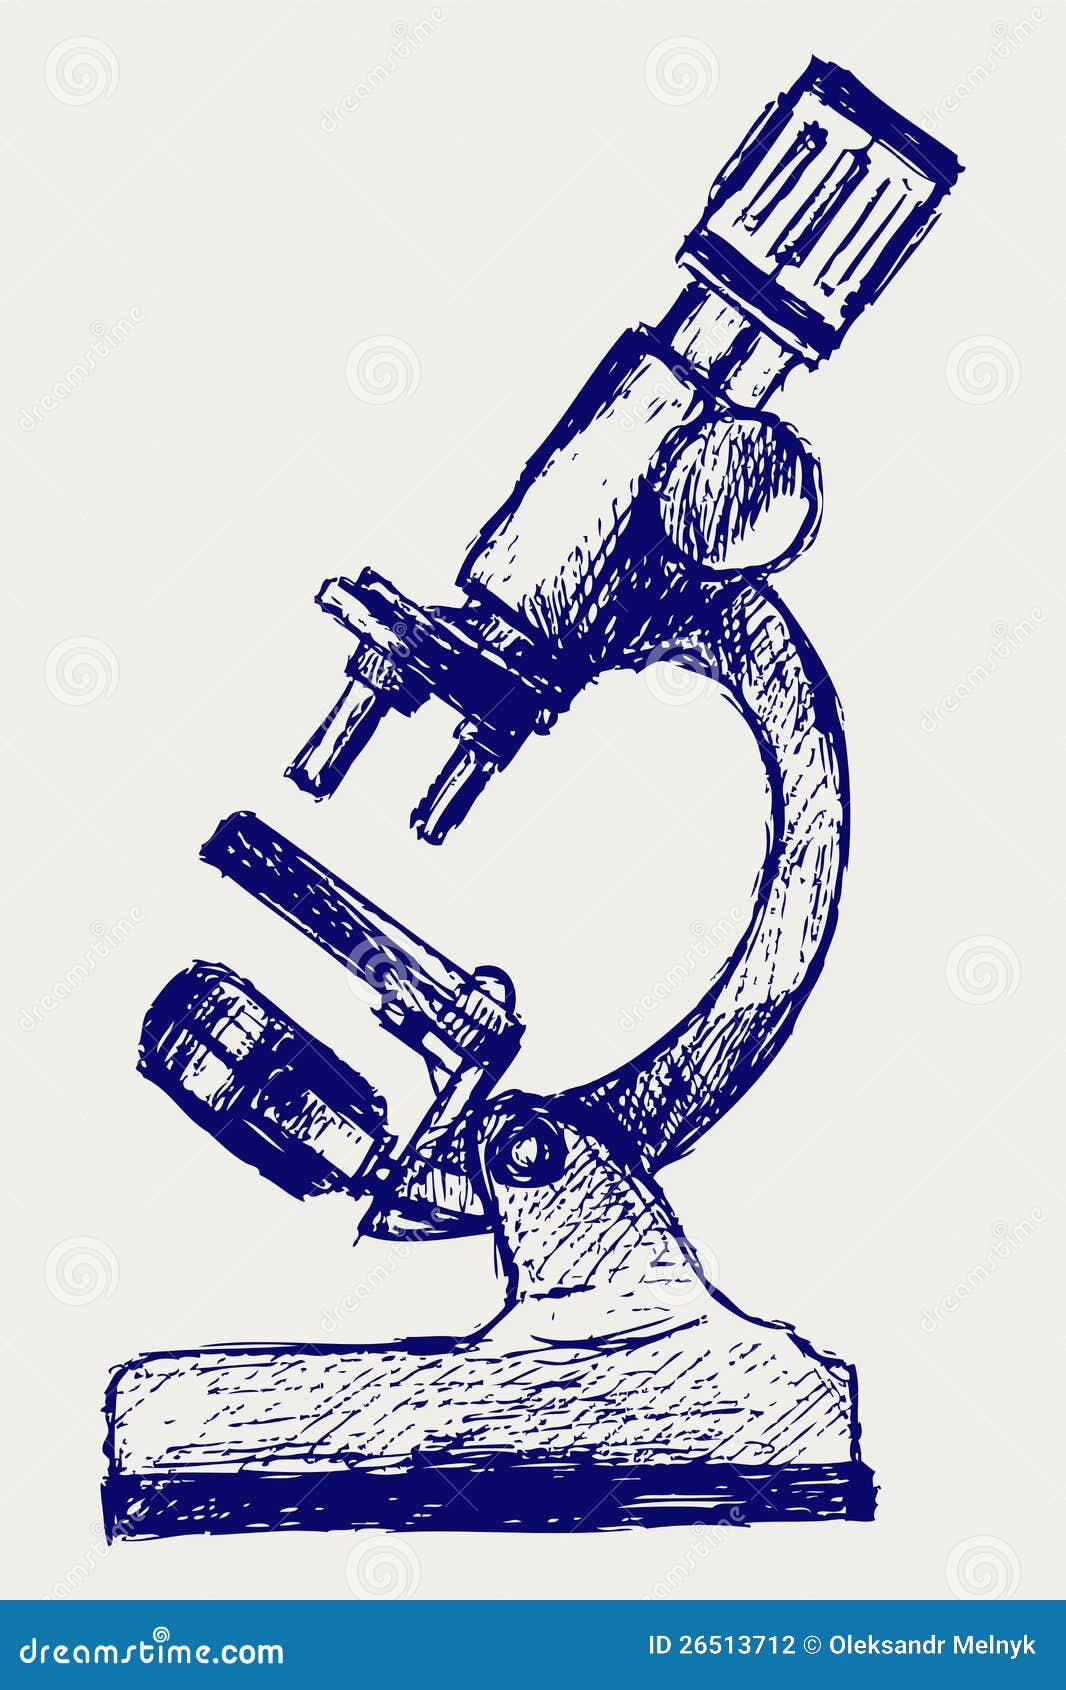 how to Draw compound microscope || Compound Microscope Diagram, step by  step Drawing - YouTube